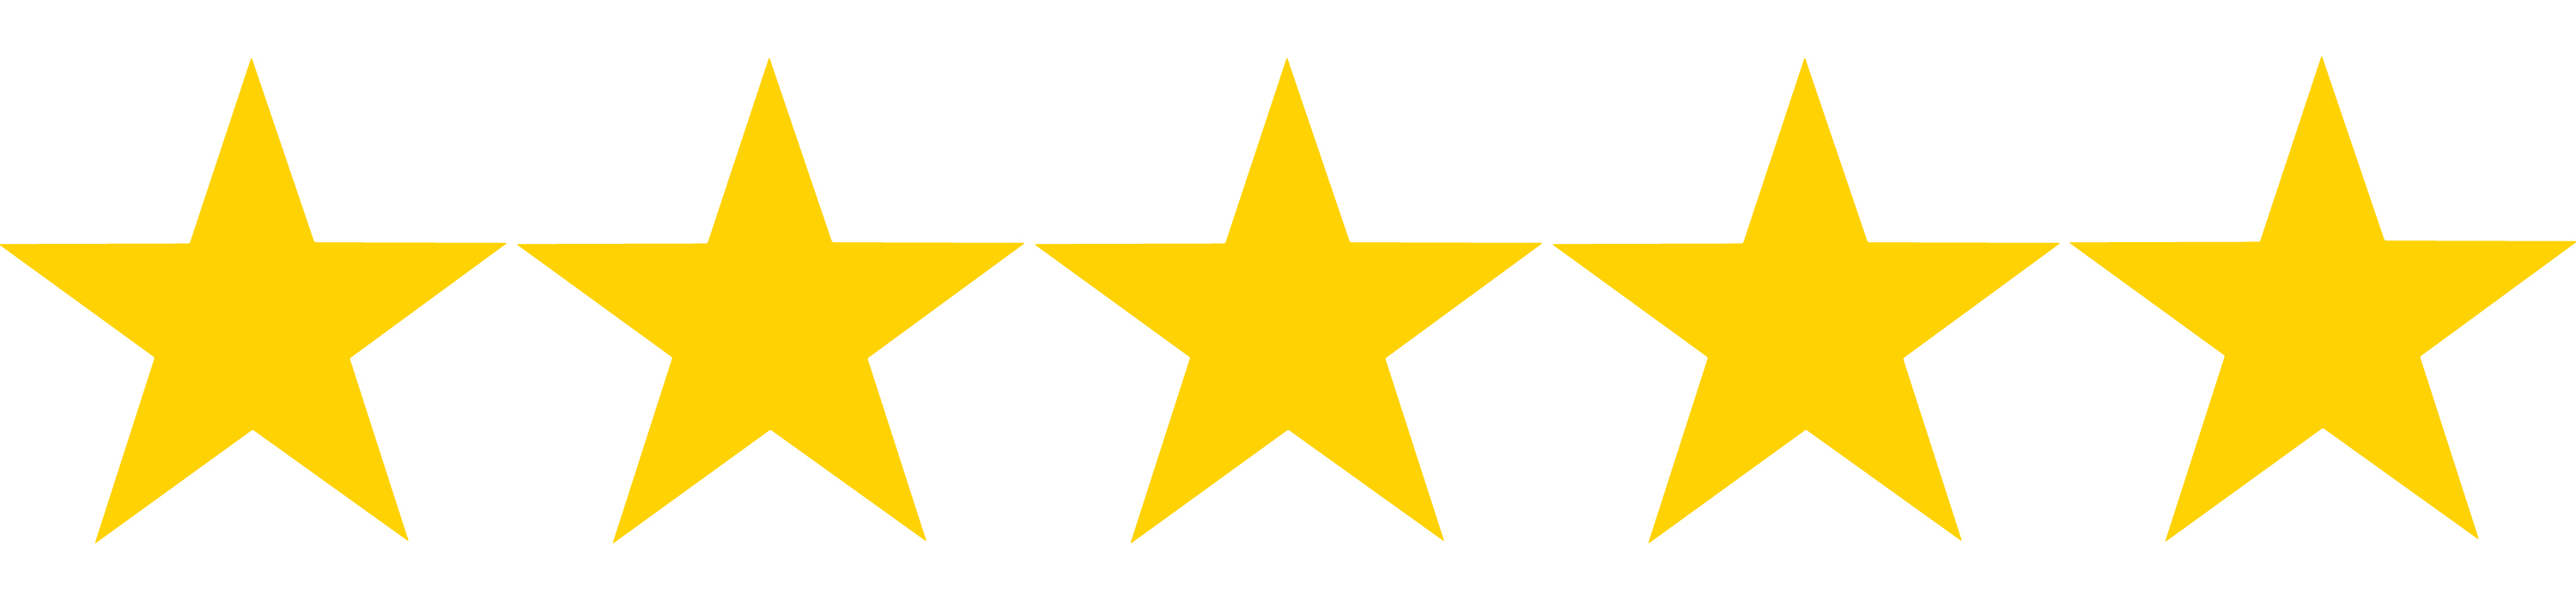 Free 5 Star Png, Download Free 5 Star Png png images, Free ClipArts on ...